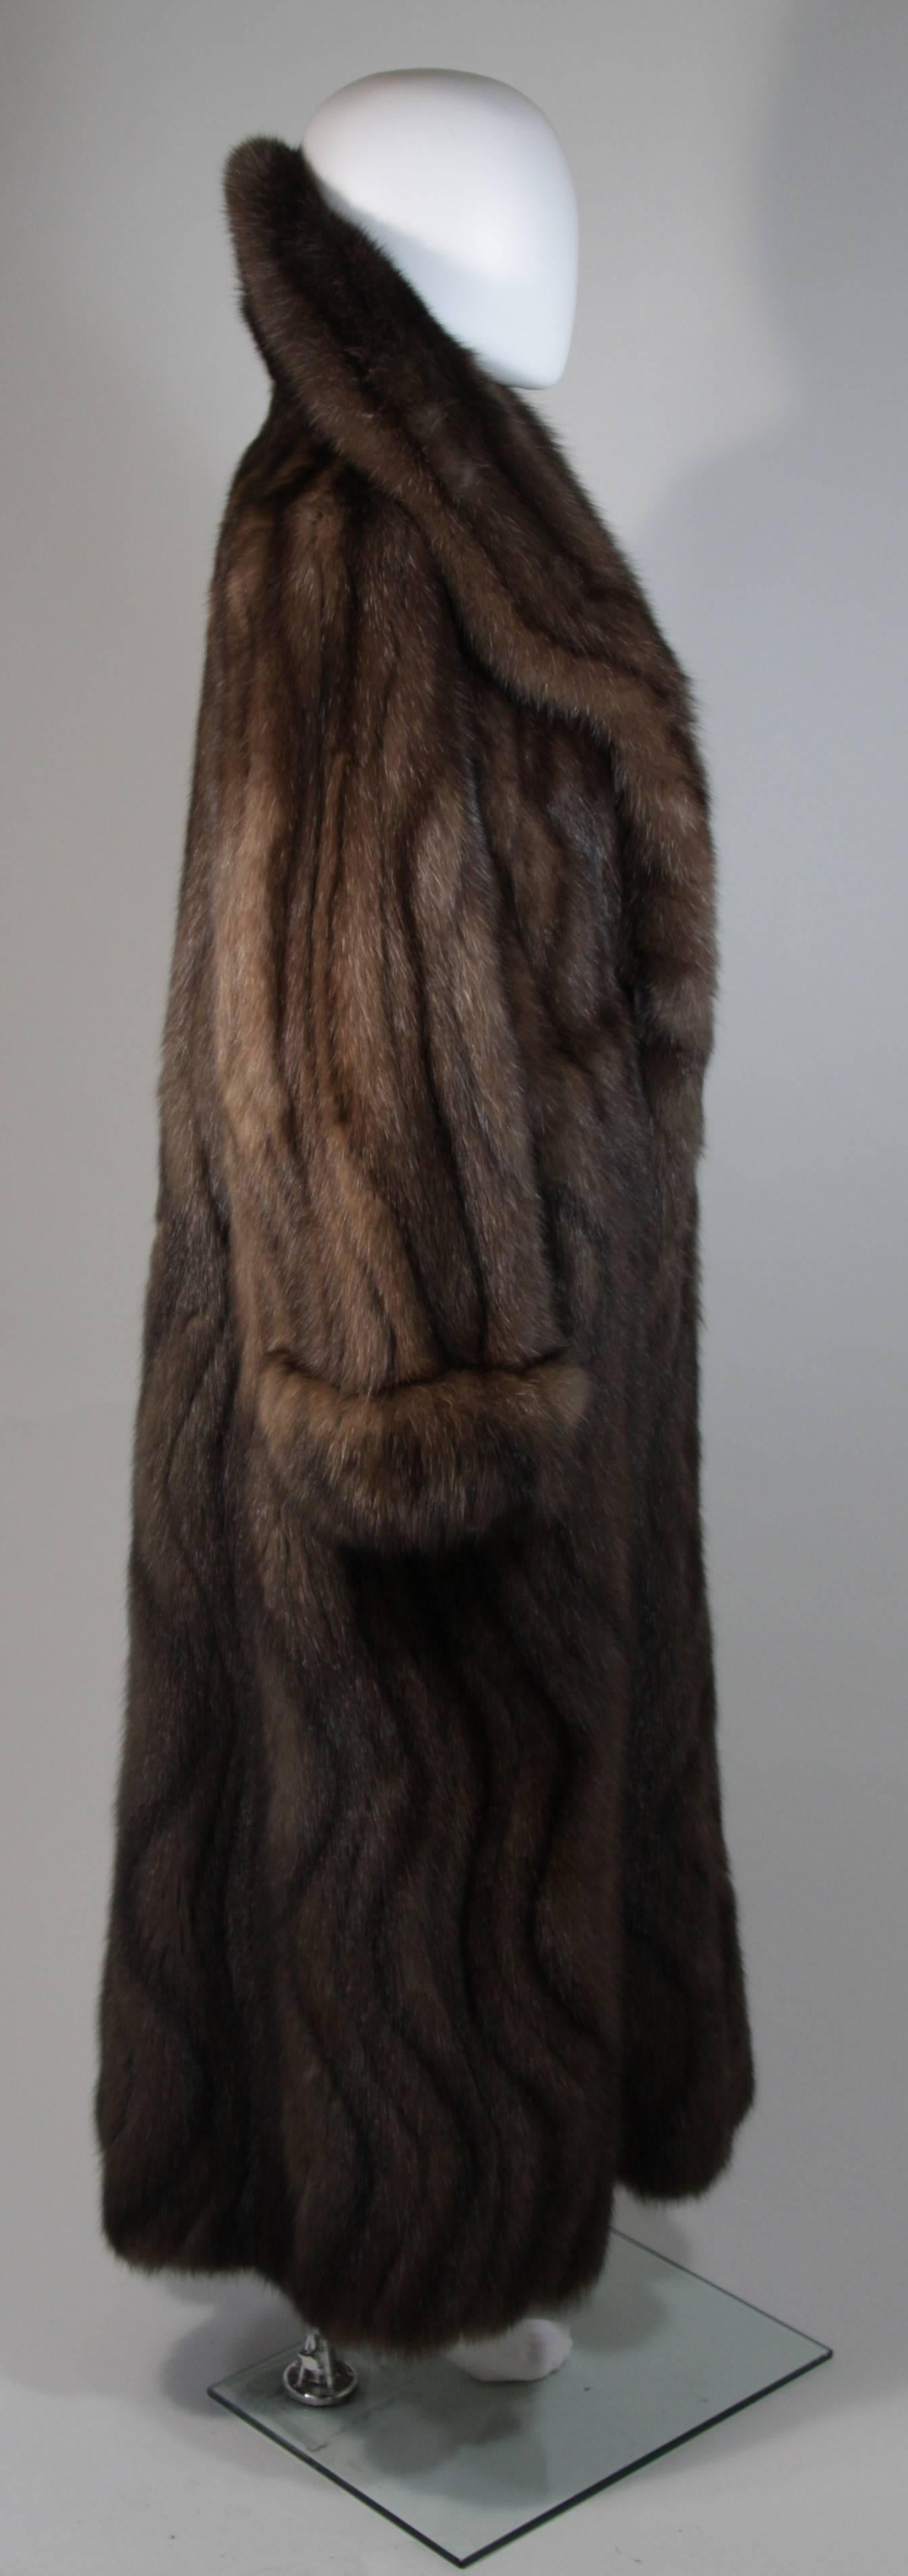 Russian Sable Coat with Wave Pattern Excellent Condition Retail $300, 000.00 1